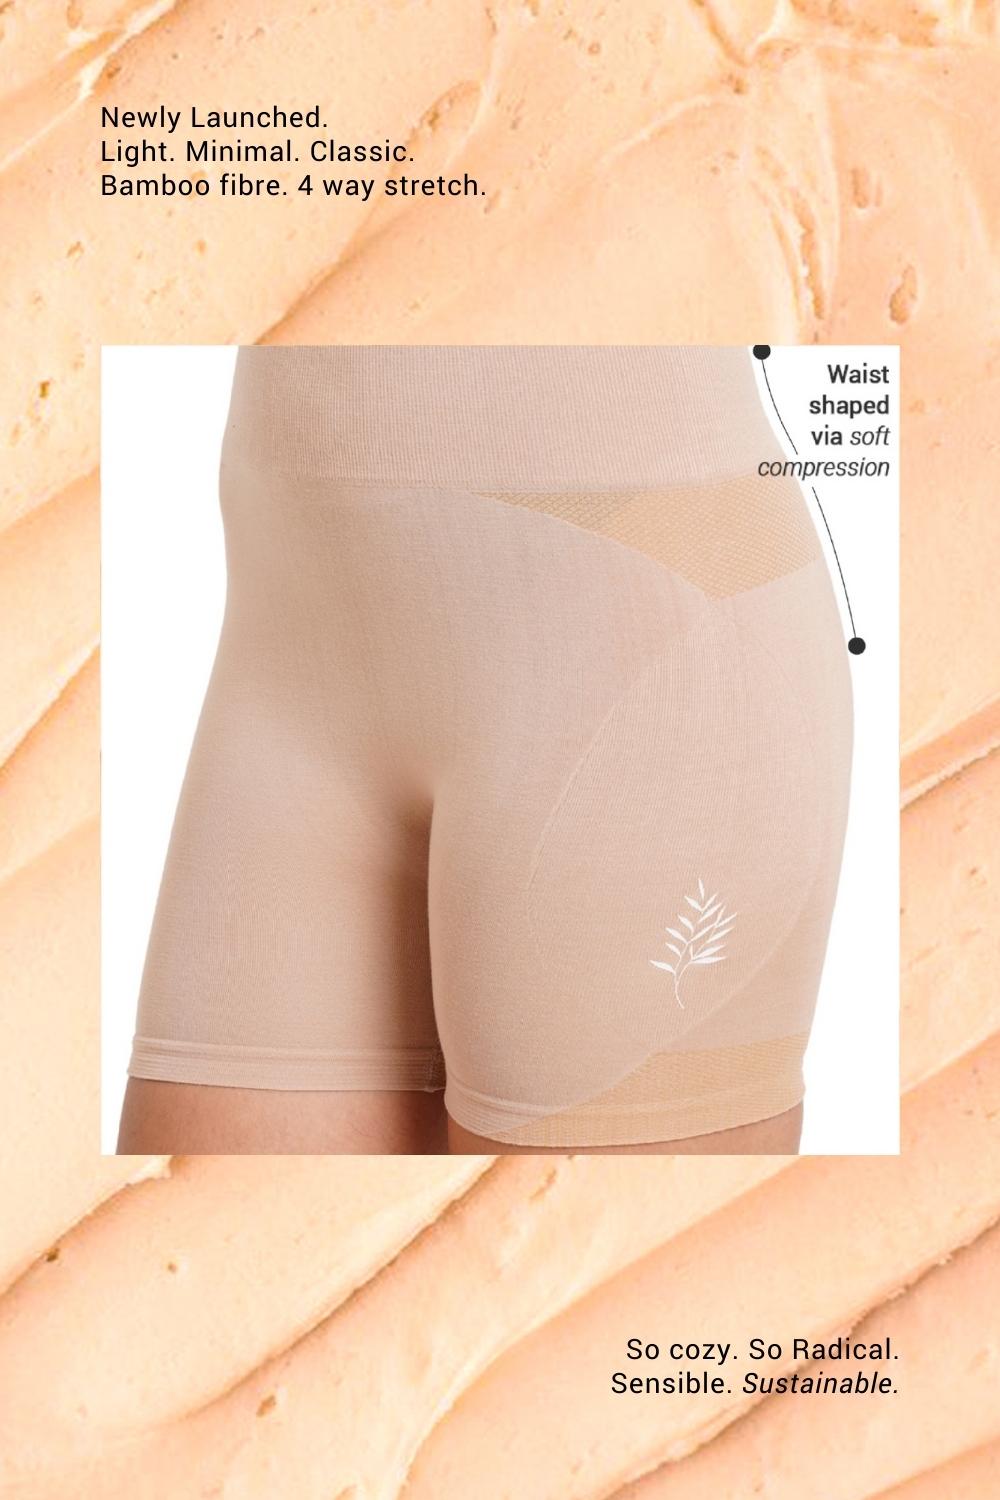 Super Soft Bamboo Fibre Antimicrobial Seamless Tummy Tucker and